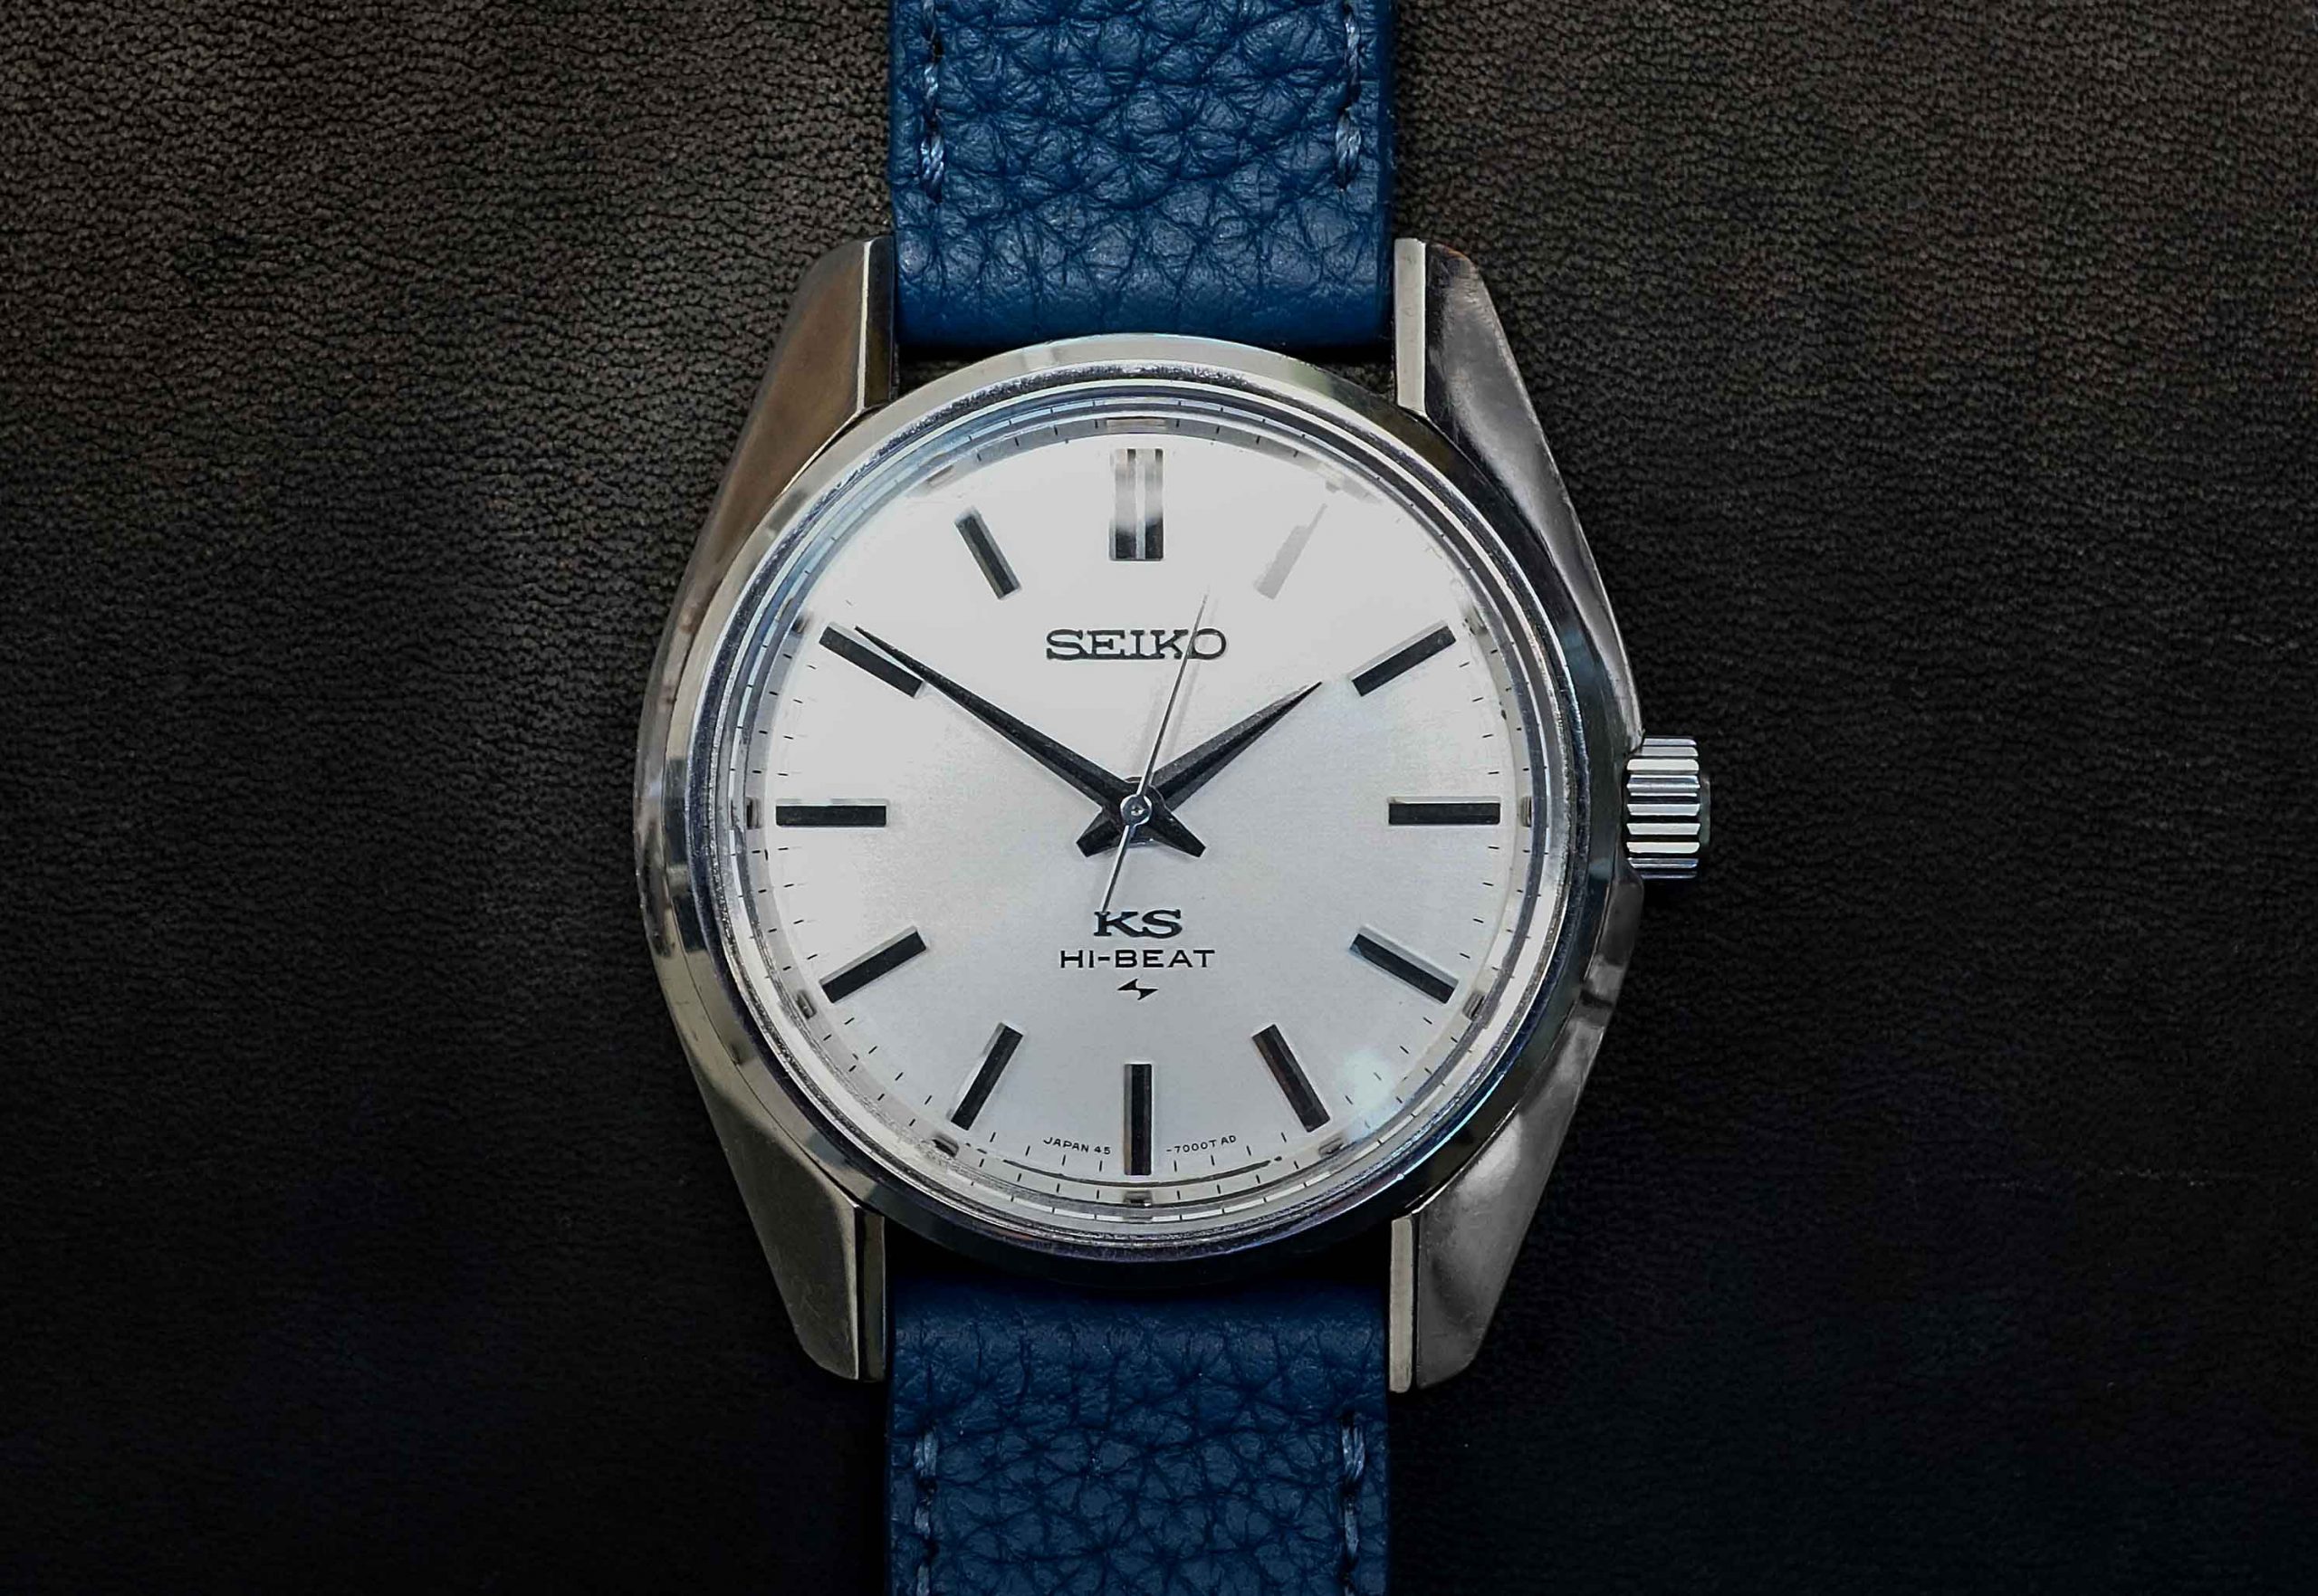 Opinion Why the 2022 King Seiko Relaunch was a Misstep - BEYOND THE DIAL